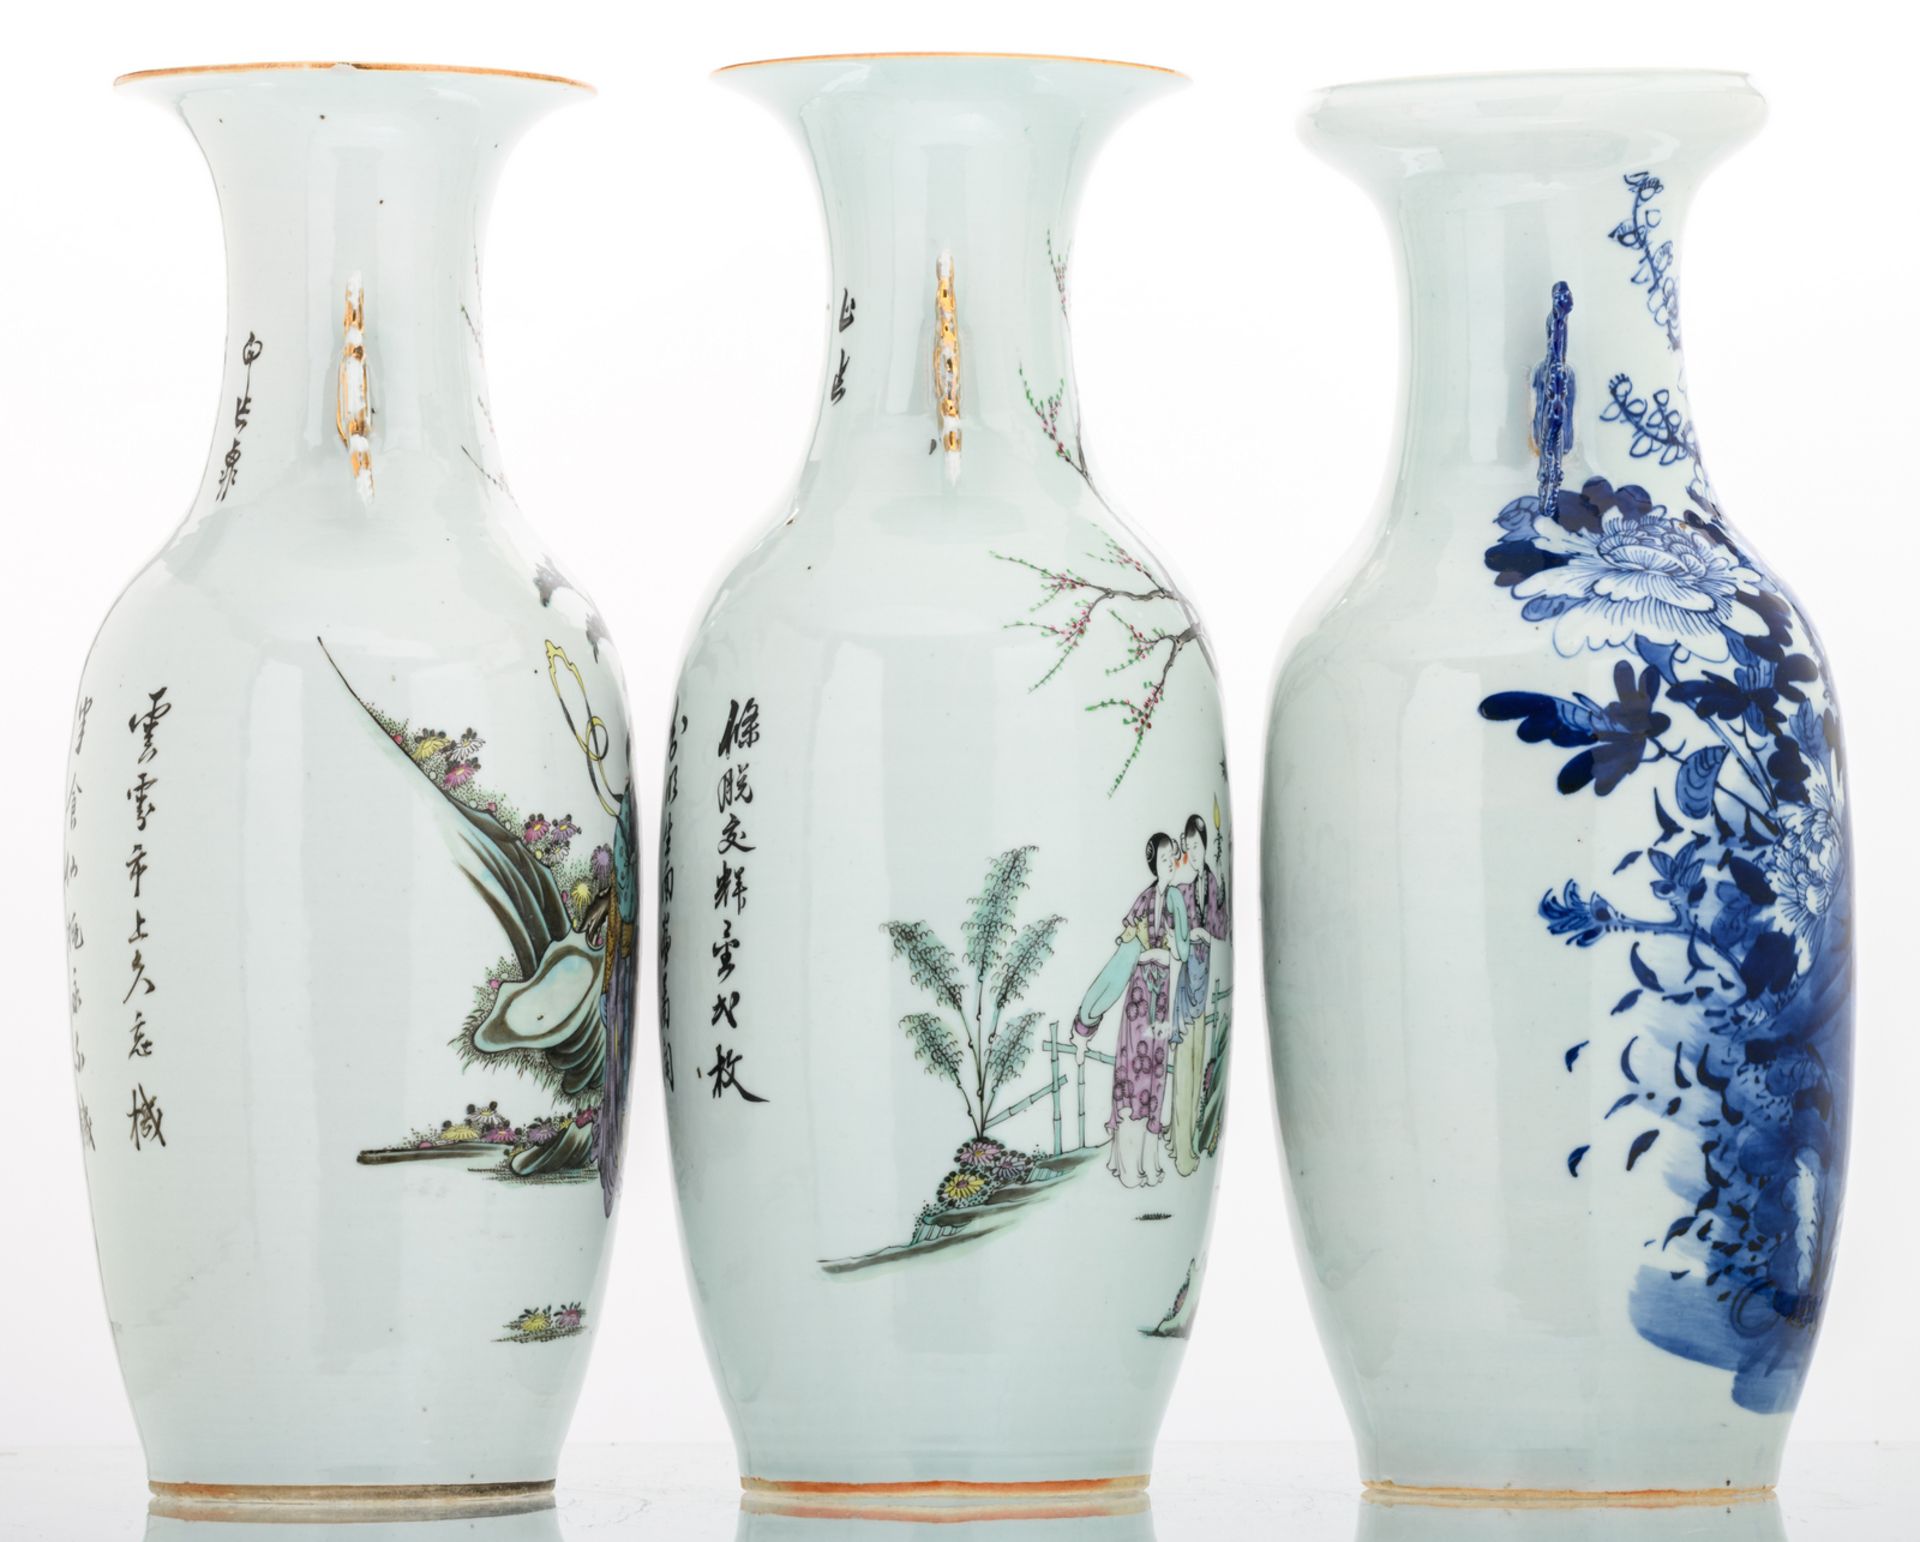 Two Chinese polychrome decorated vases with a gallant garden scene and calligraphic texts; added a - Image 4 of 8